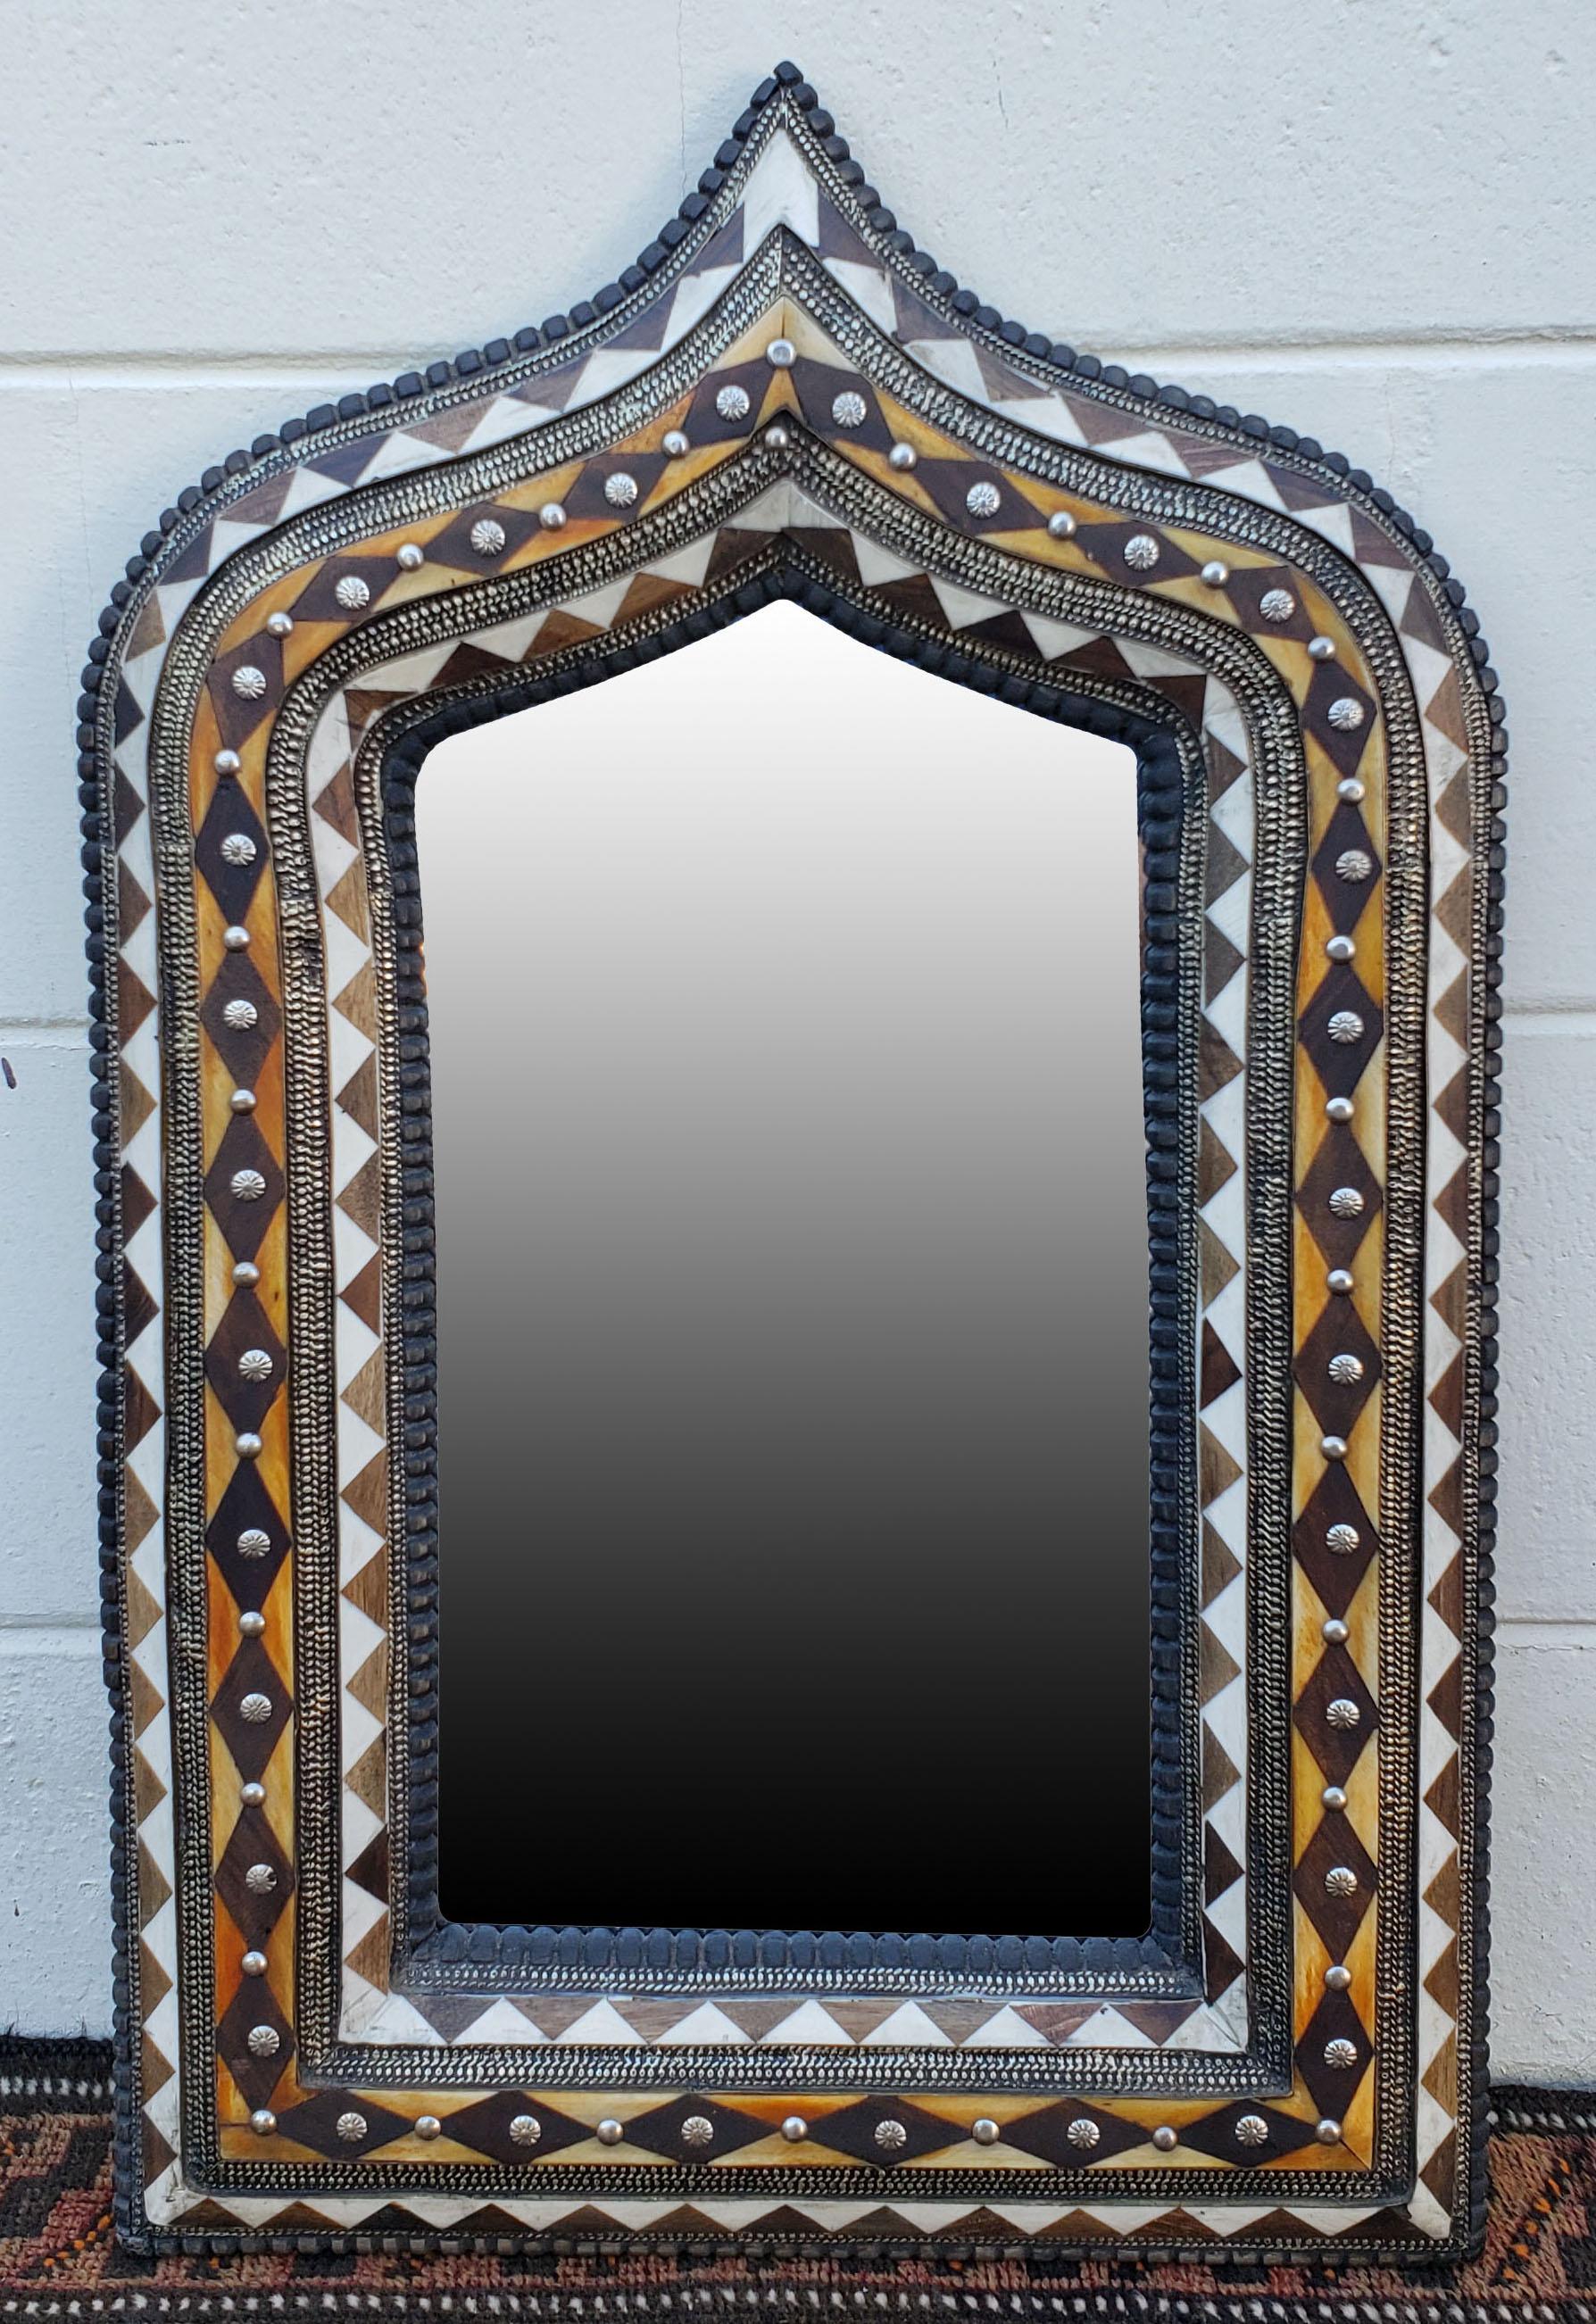 Small size metal and camel bone inlay Moroccan mirror. Made in the city of Marrakech. Rectangular shape with an arched top, and measuring approximately 23.5